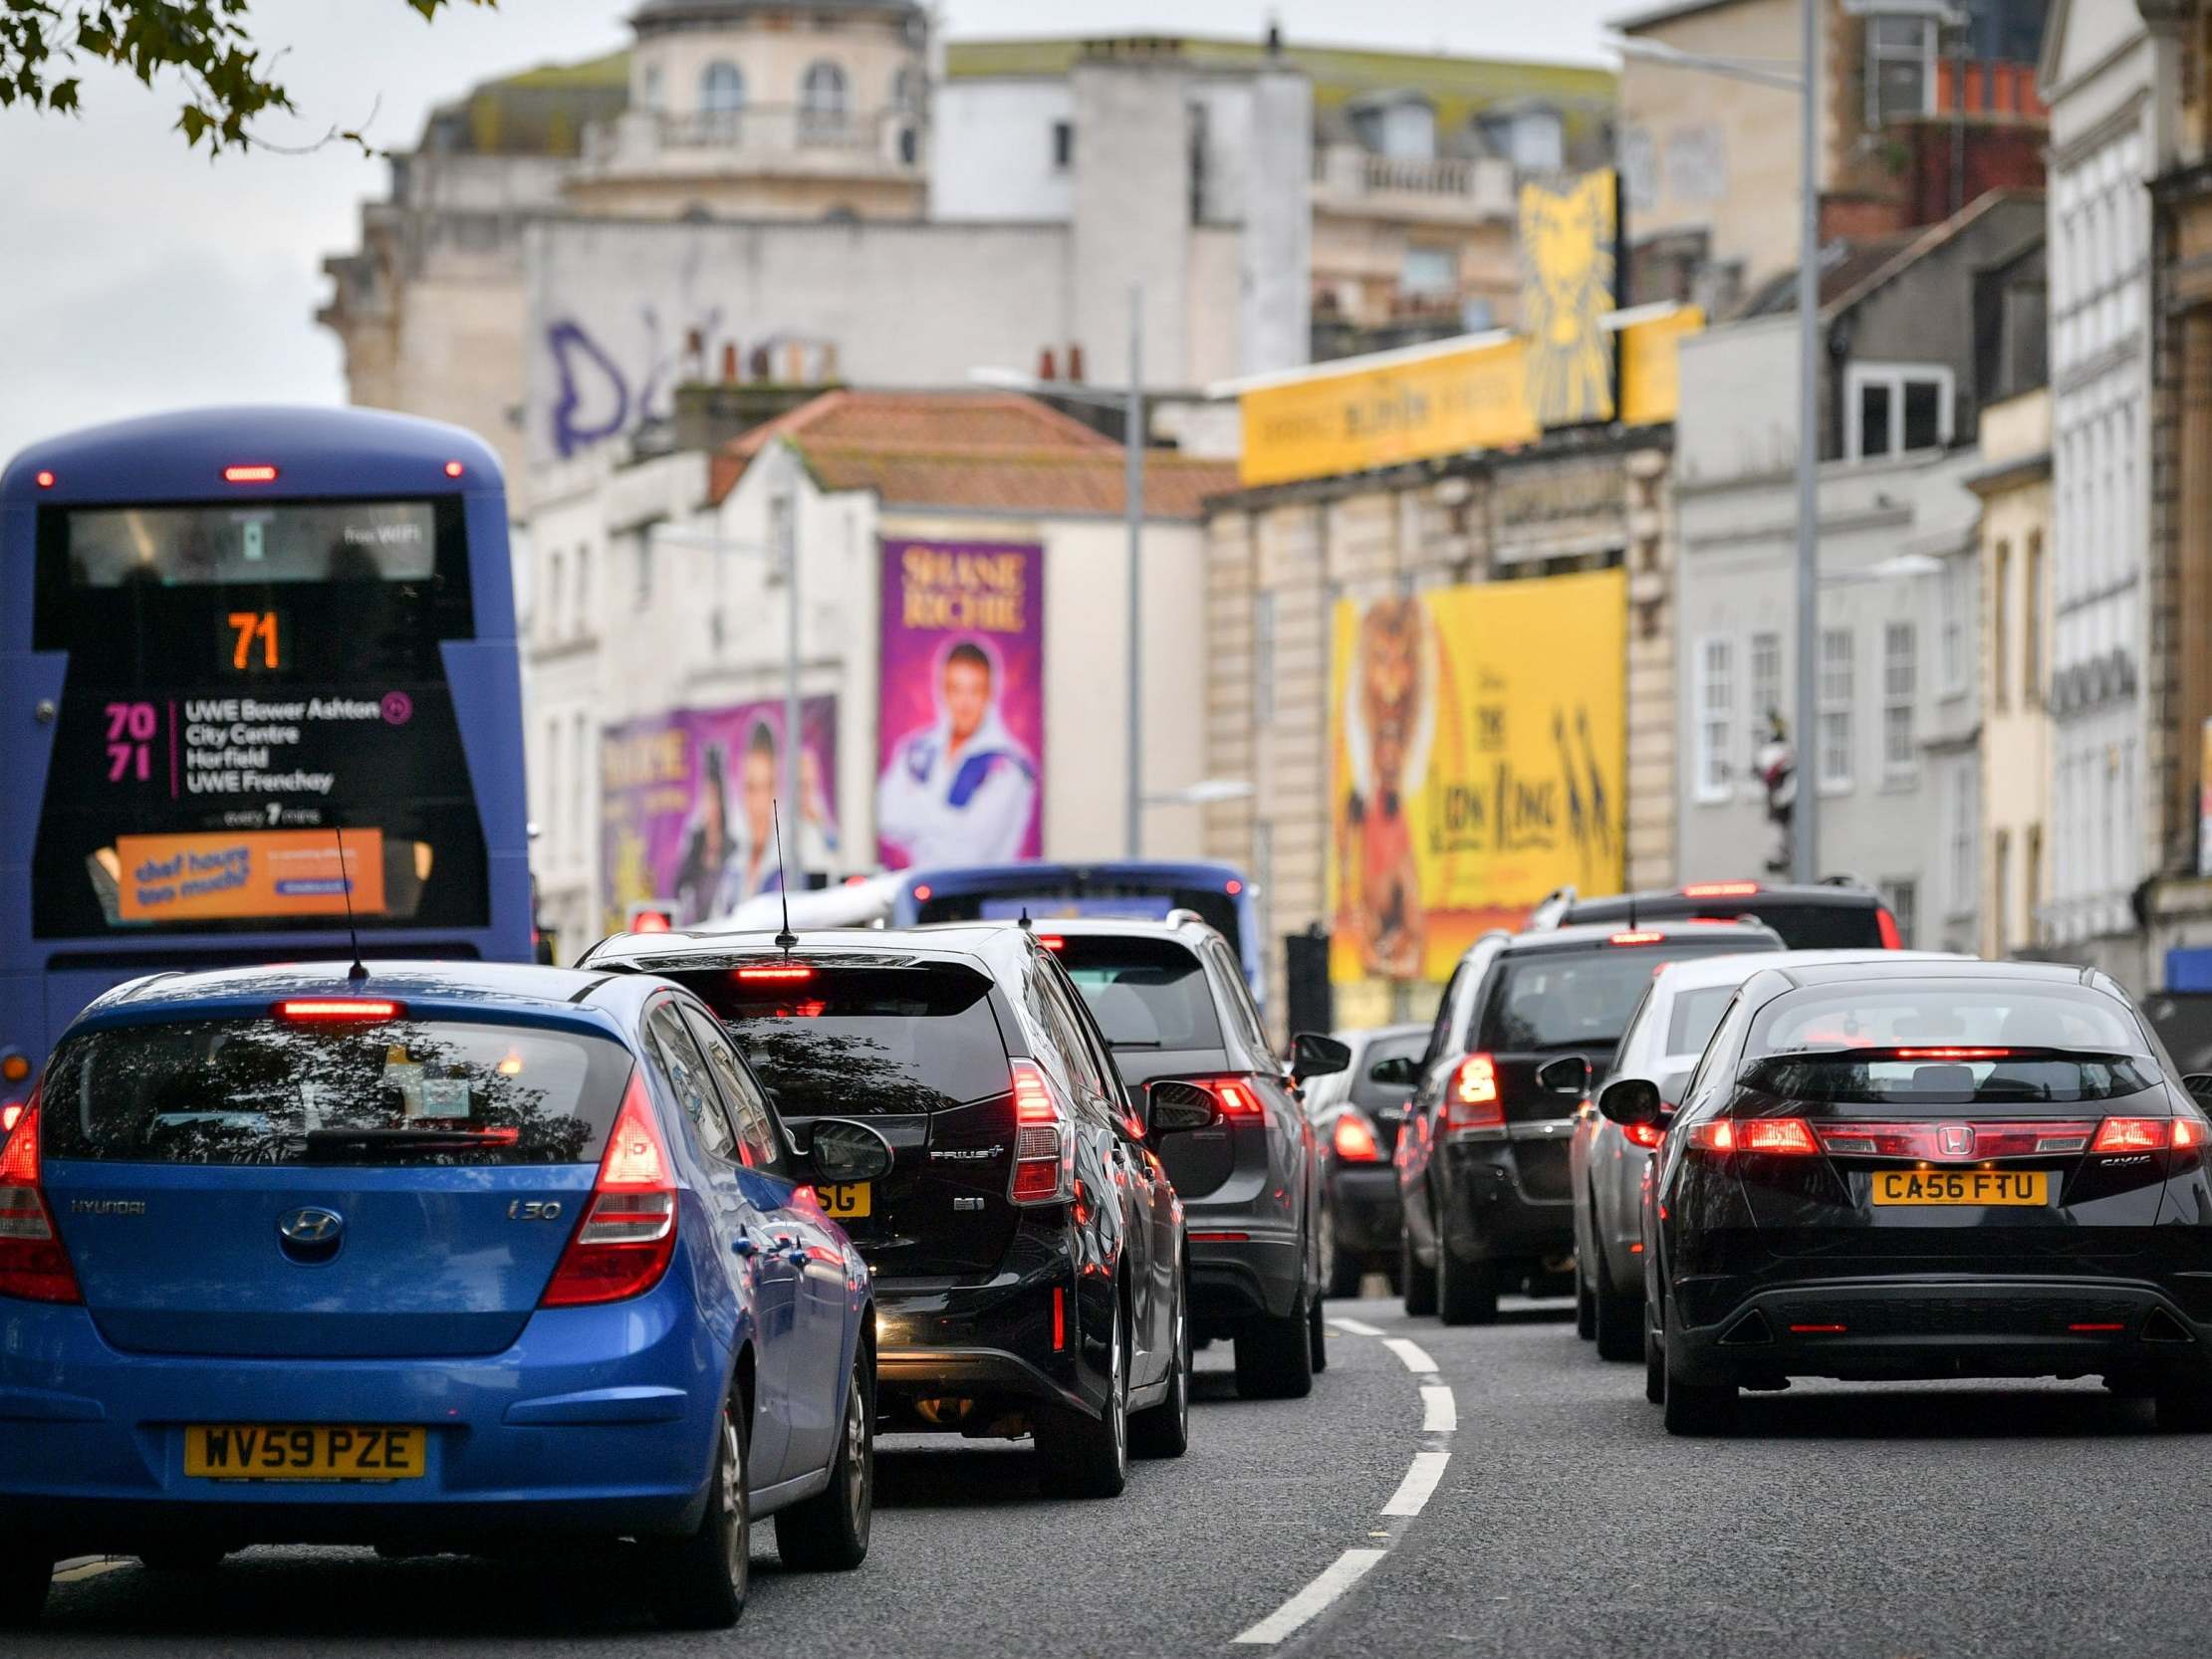 Bristol's mayor has approved plans to make the city centre free of diesel vehicles by 2021